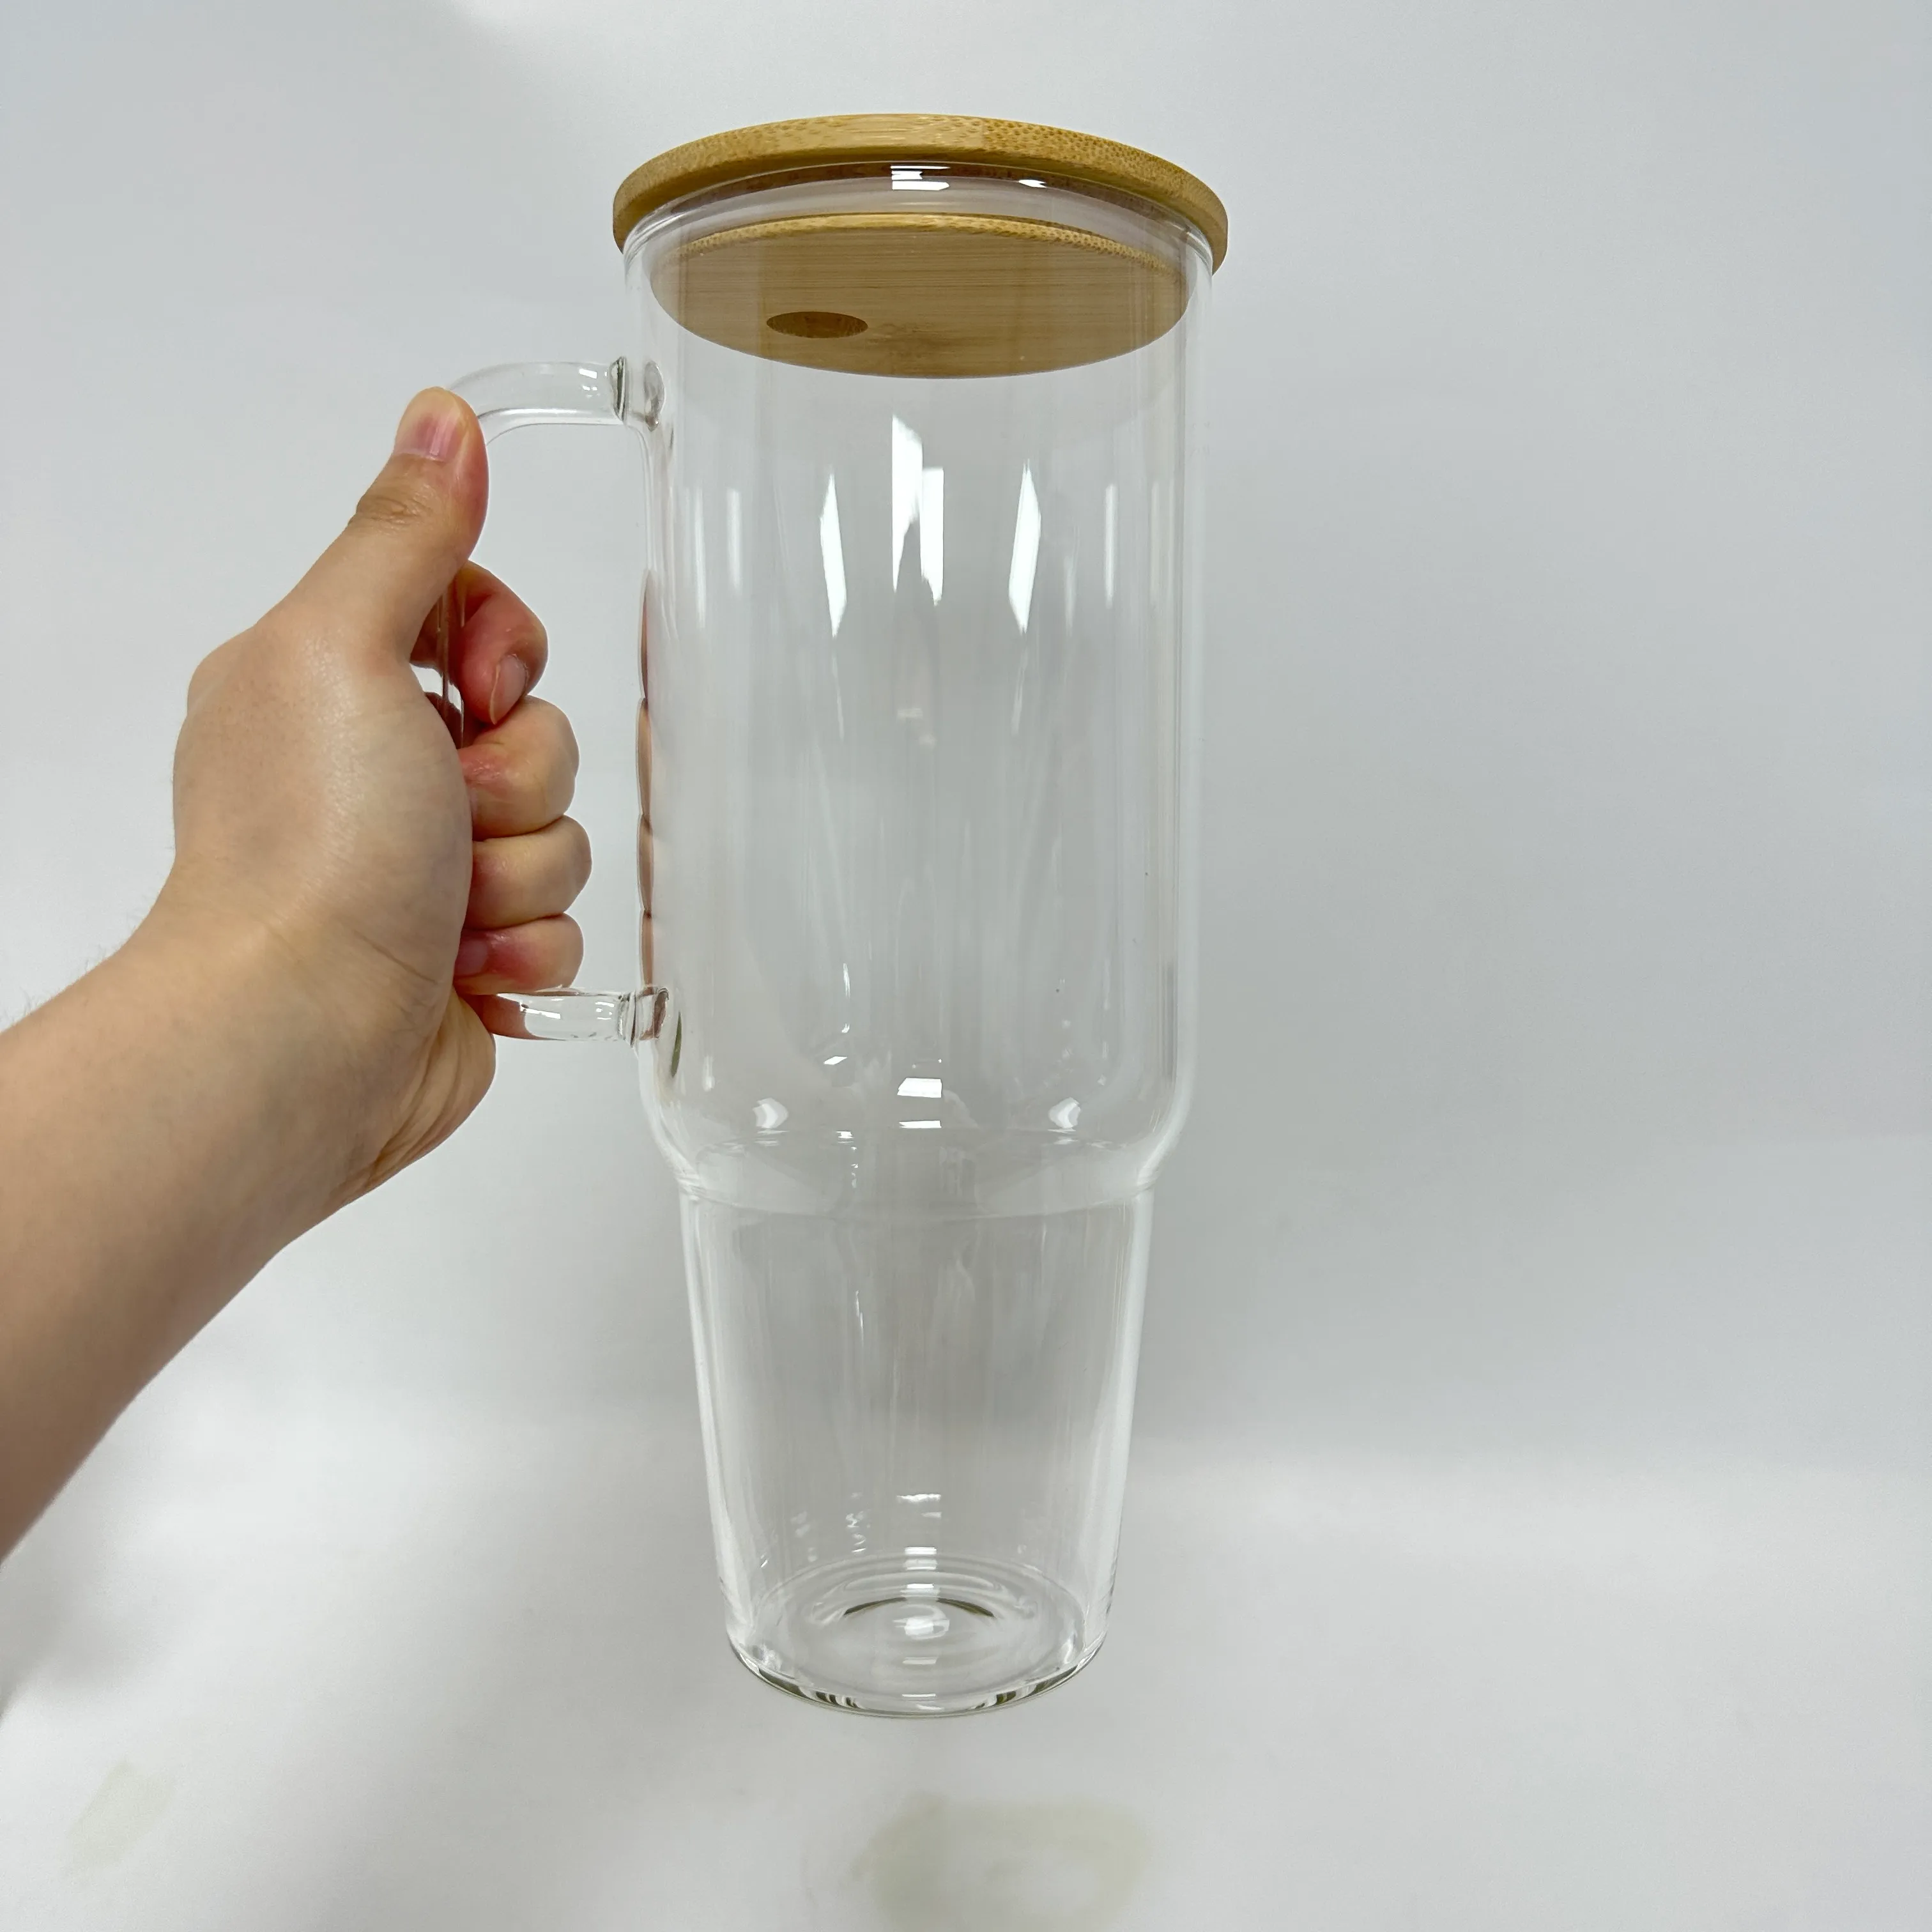 Clear Frosted Sublimation Glass Blank Tumblers In Bulk With Handle And  Bamboo Lid Ideal For DIY Printing And Outdoor Travel Available In 40oz And  32oz Sizes From Babyonline, $9.44